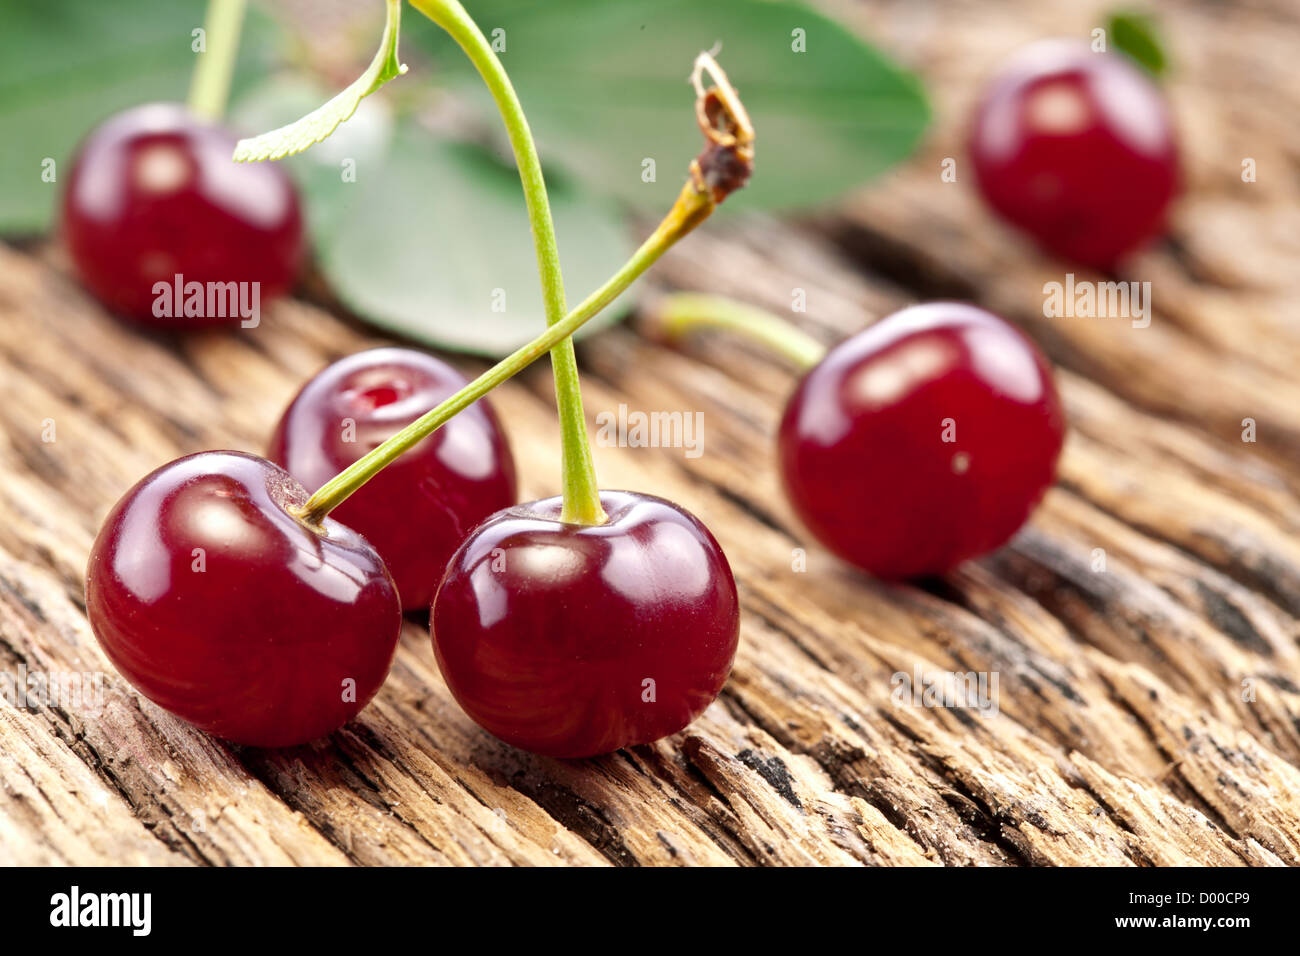 Cherries with leaves on a old wooden table. Stock Photo